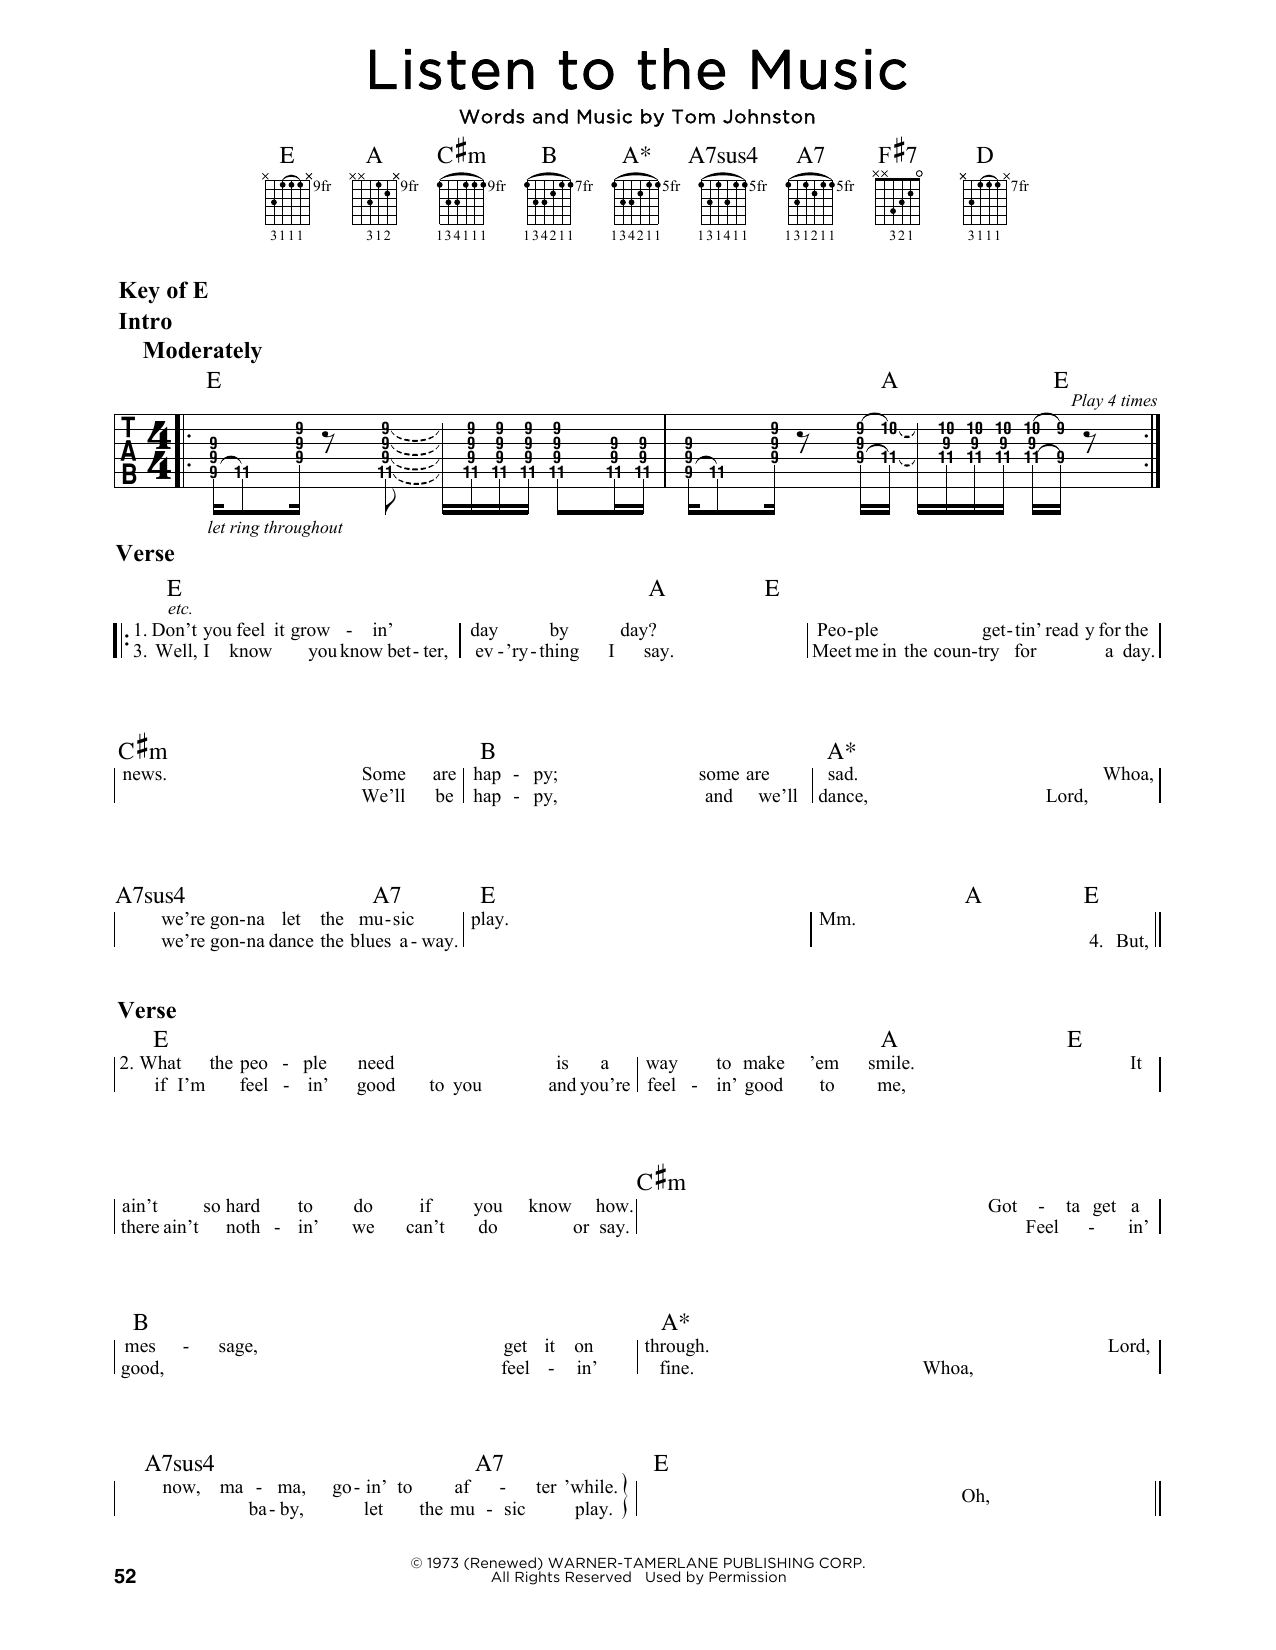 Download The Doobie Brothers Listen To The Music Sheet Music